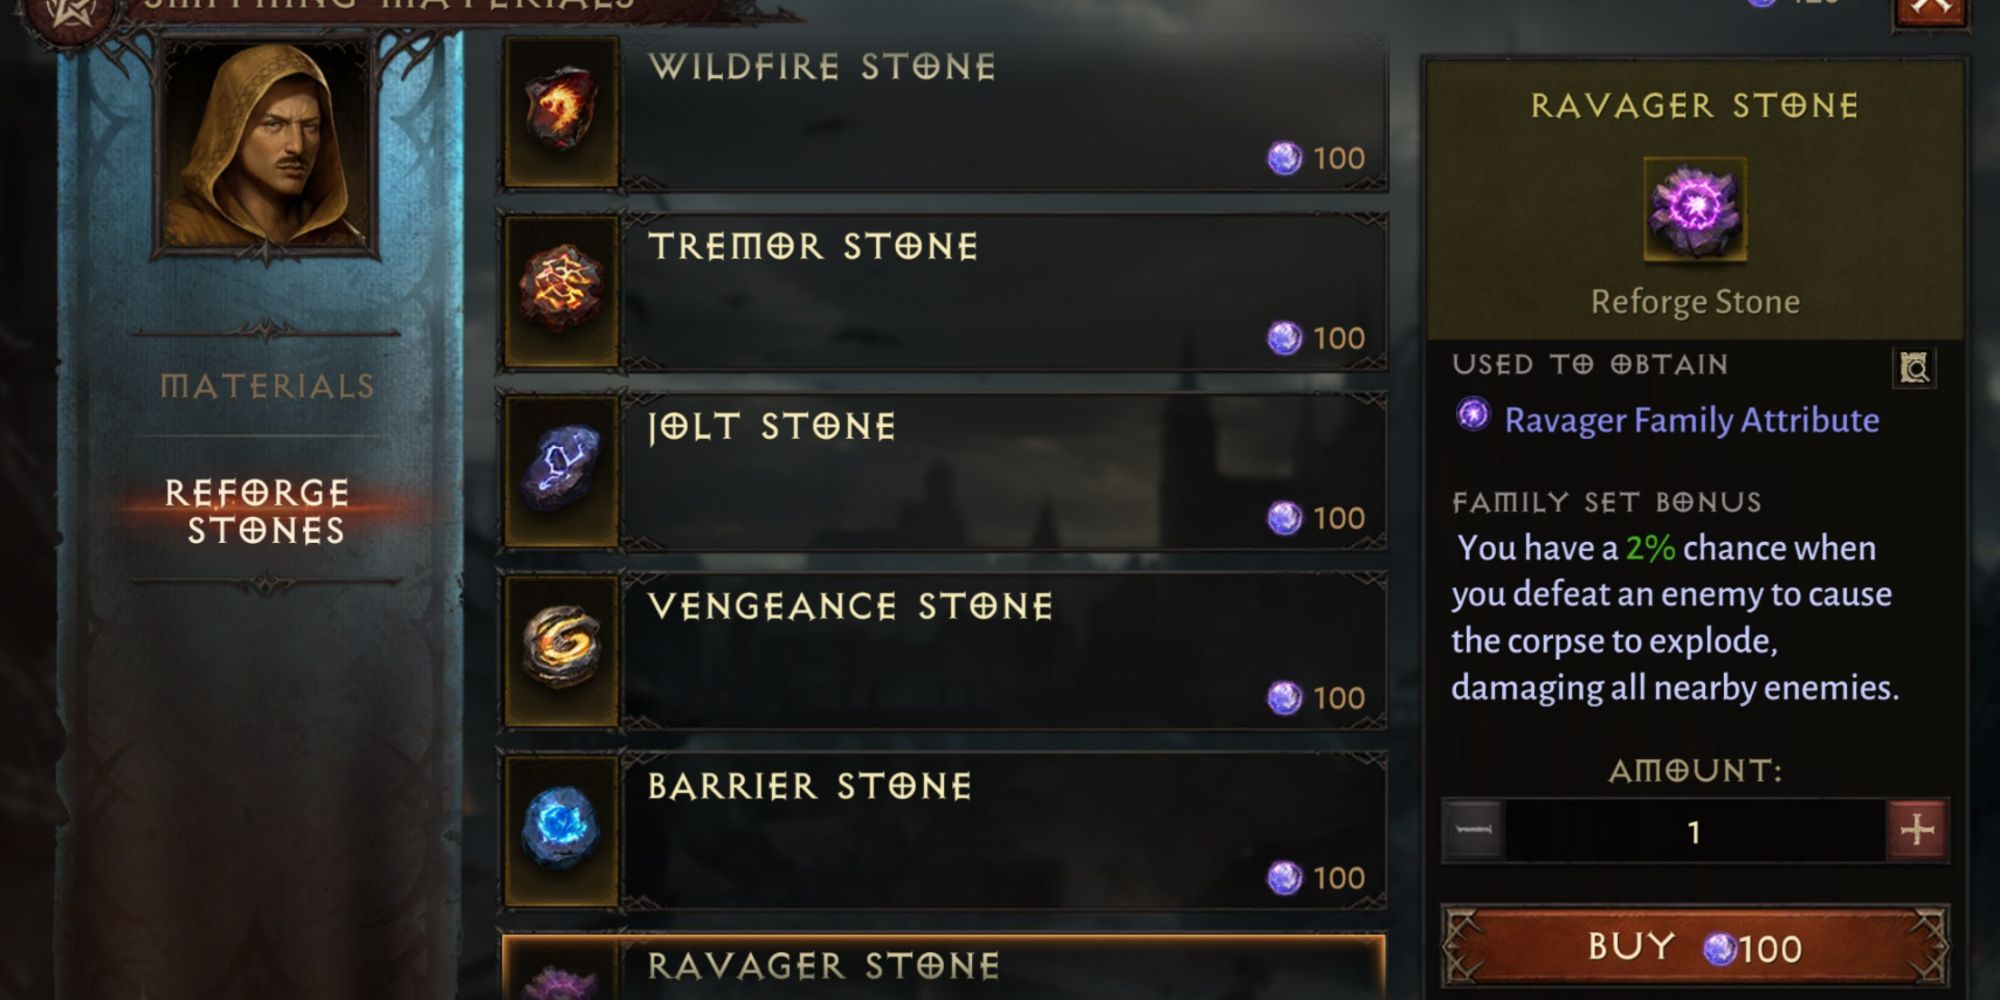 Diablo Immortal looking At Reforge Stones From The Vendor